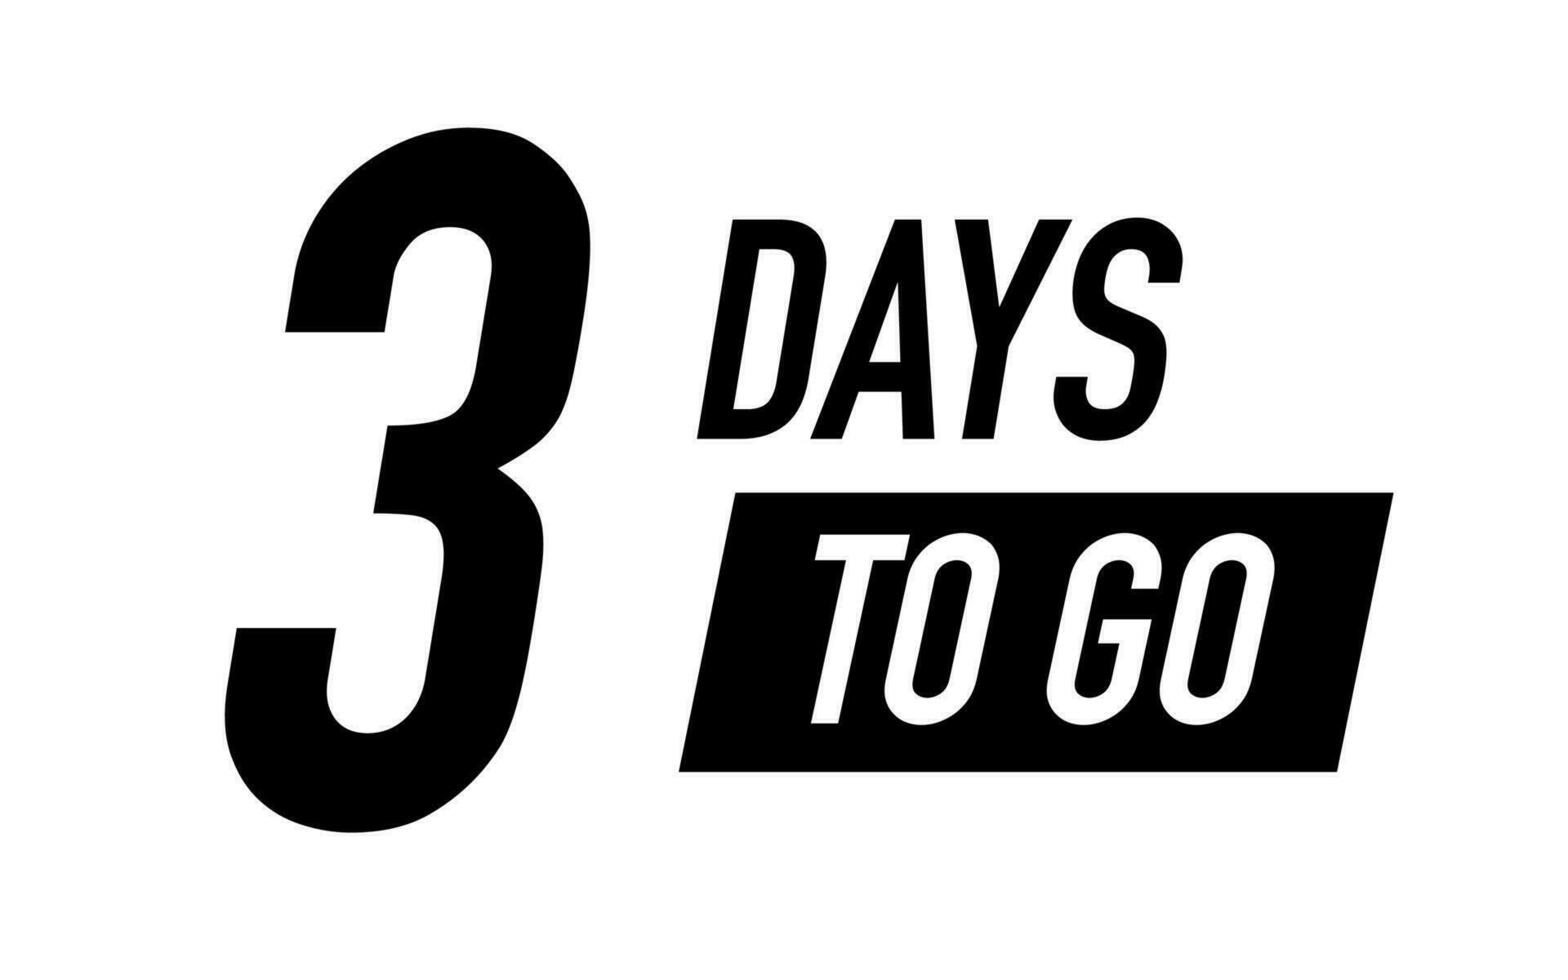 3 days to go vector symbol black color style